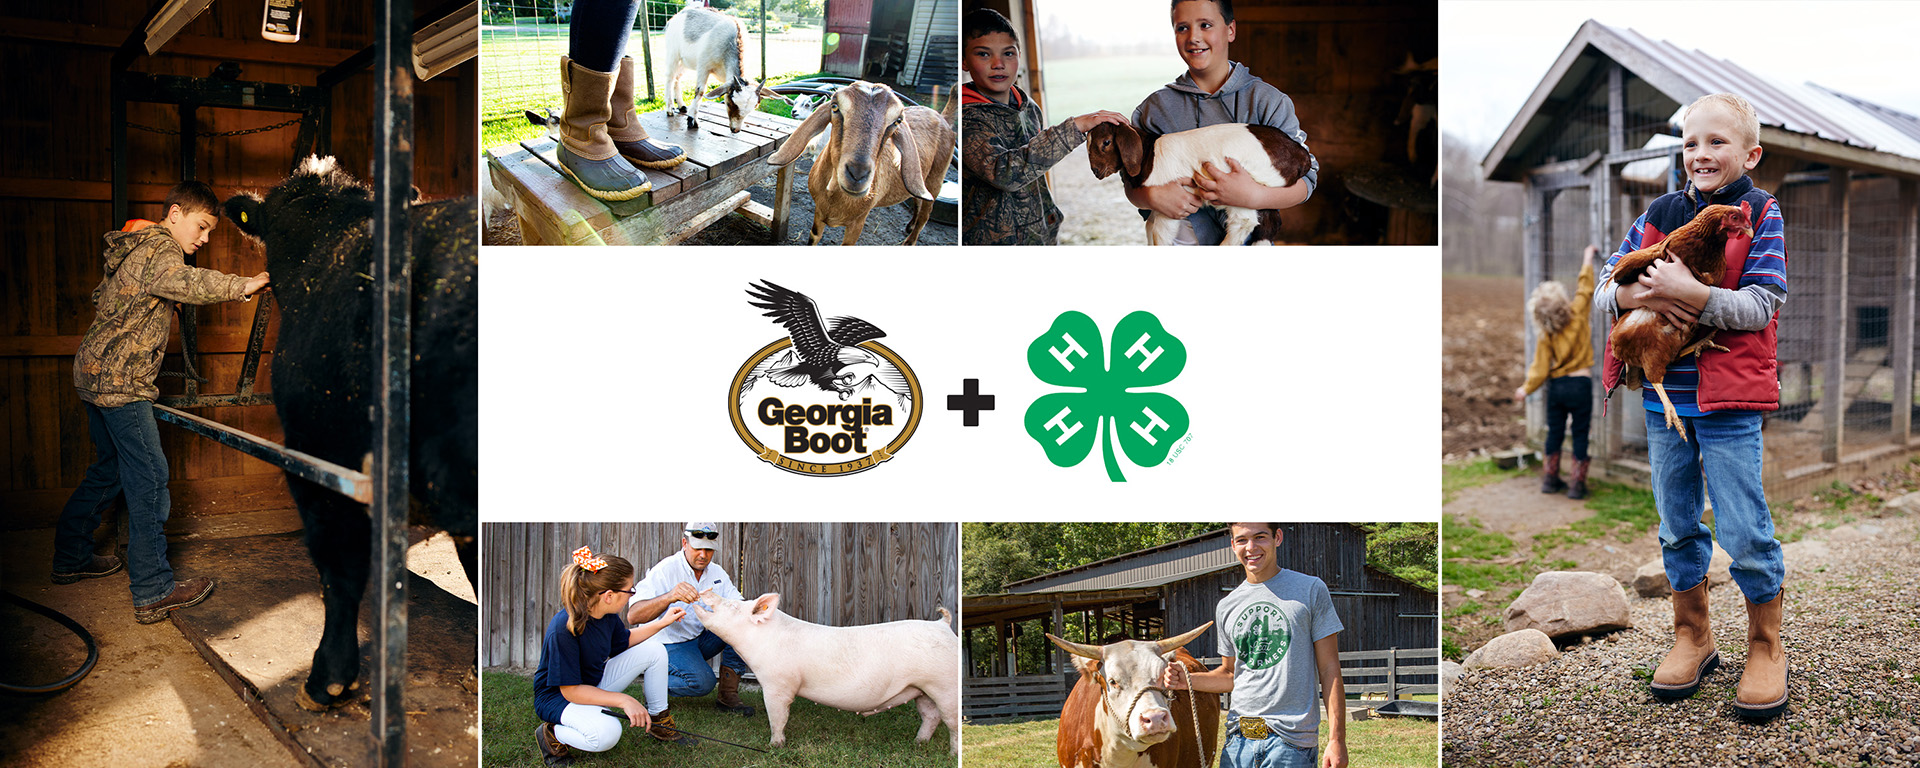 Various images of 4H members tending to their animal projects. Boy brushing his cow. Girl feeding a pig with her father. 
                    Boy smiling while holding a chicken. Brothers smiling while holding a baby goat.